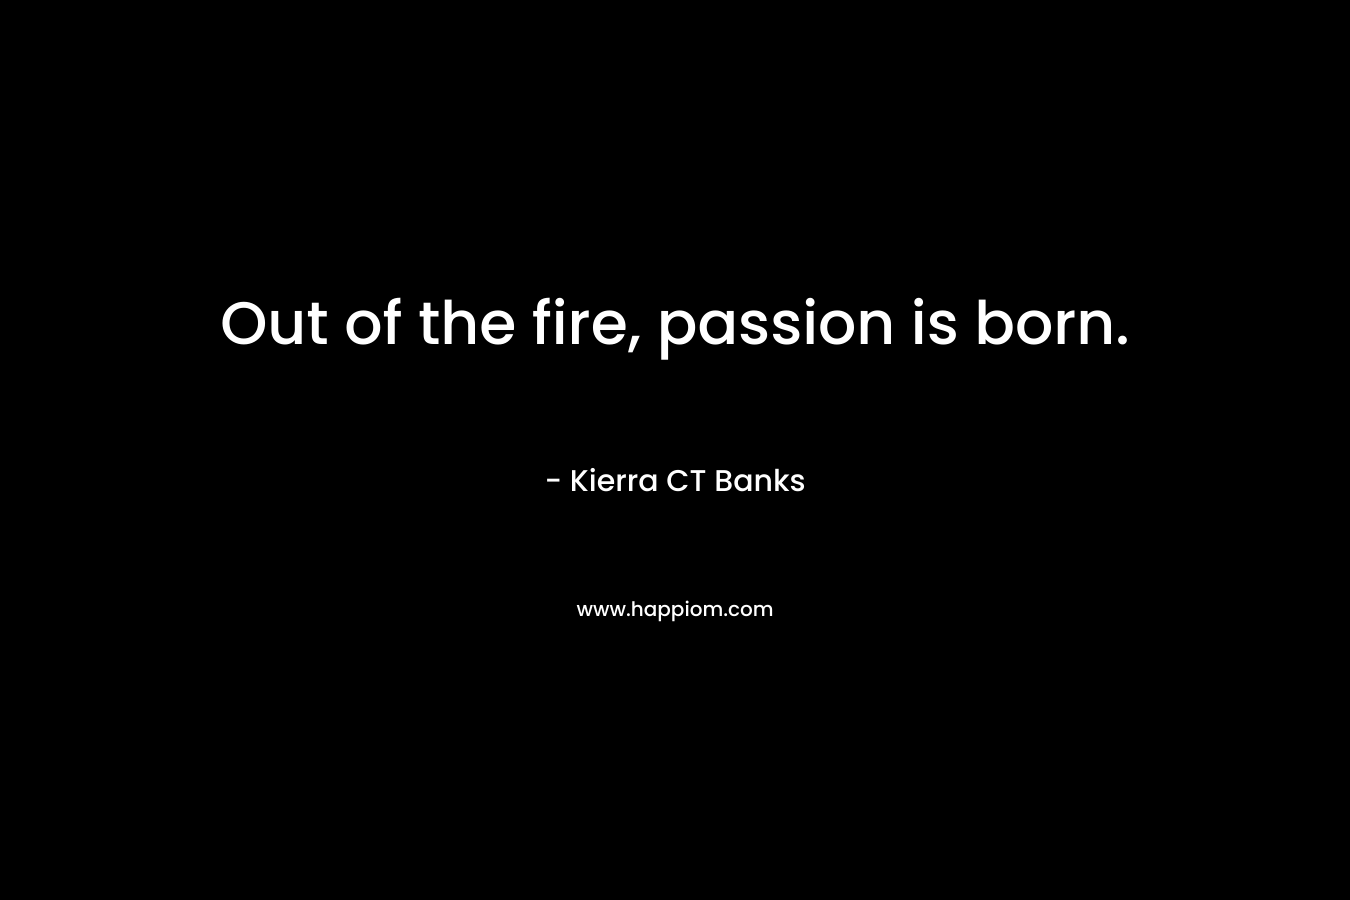 Out of the fire, passion is born. – Kierra CT Banks